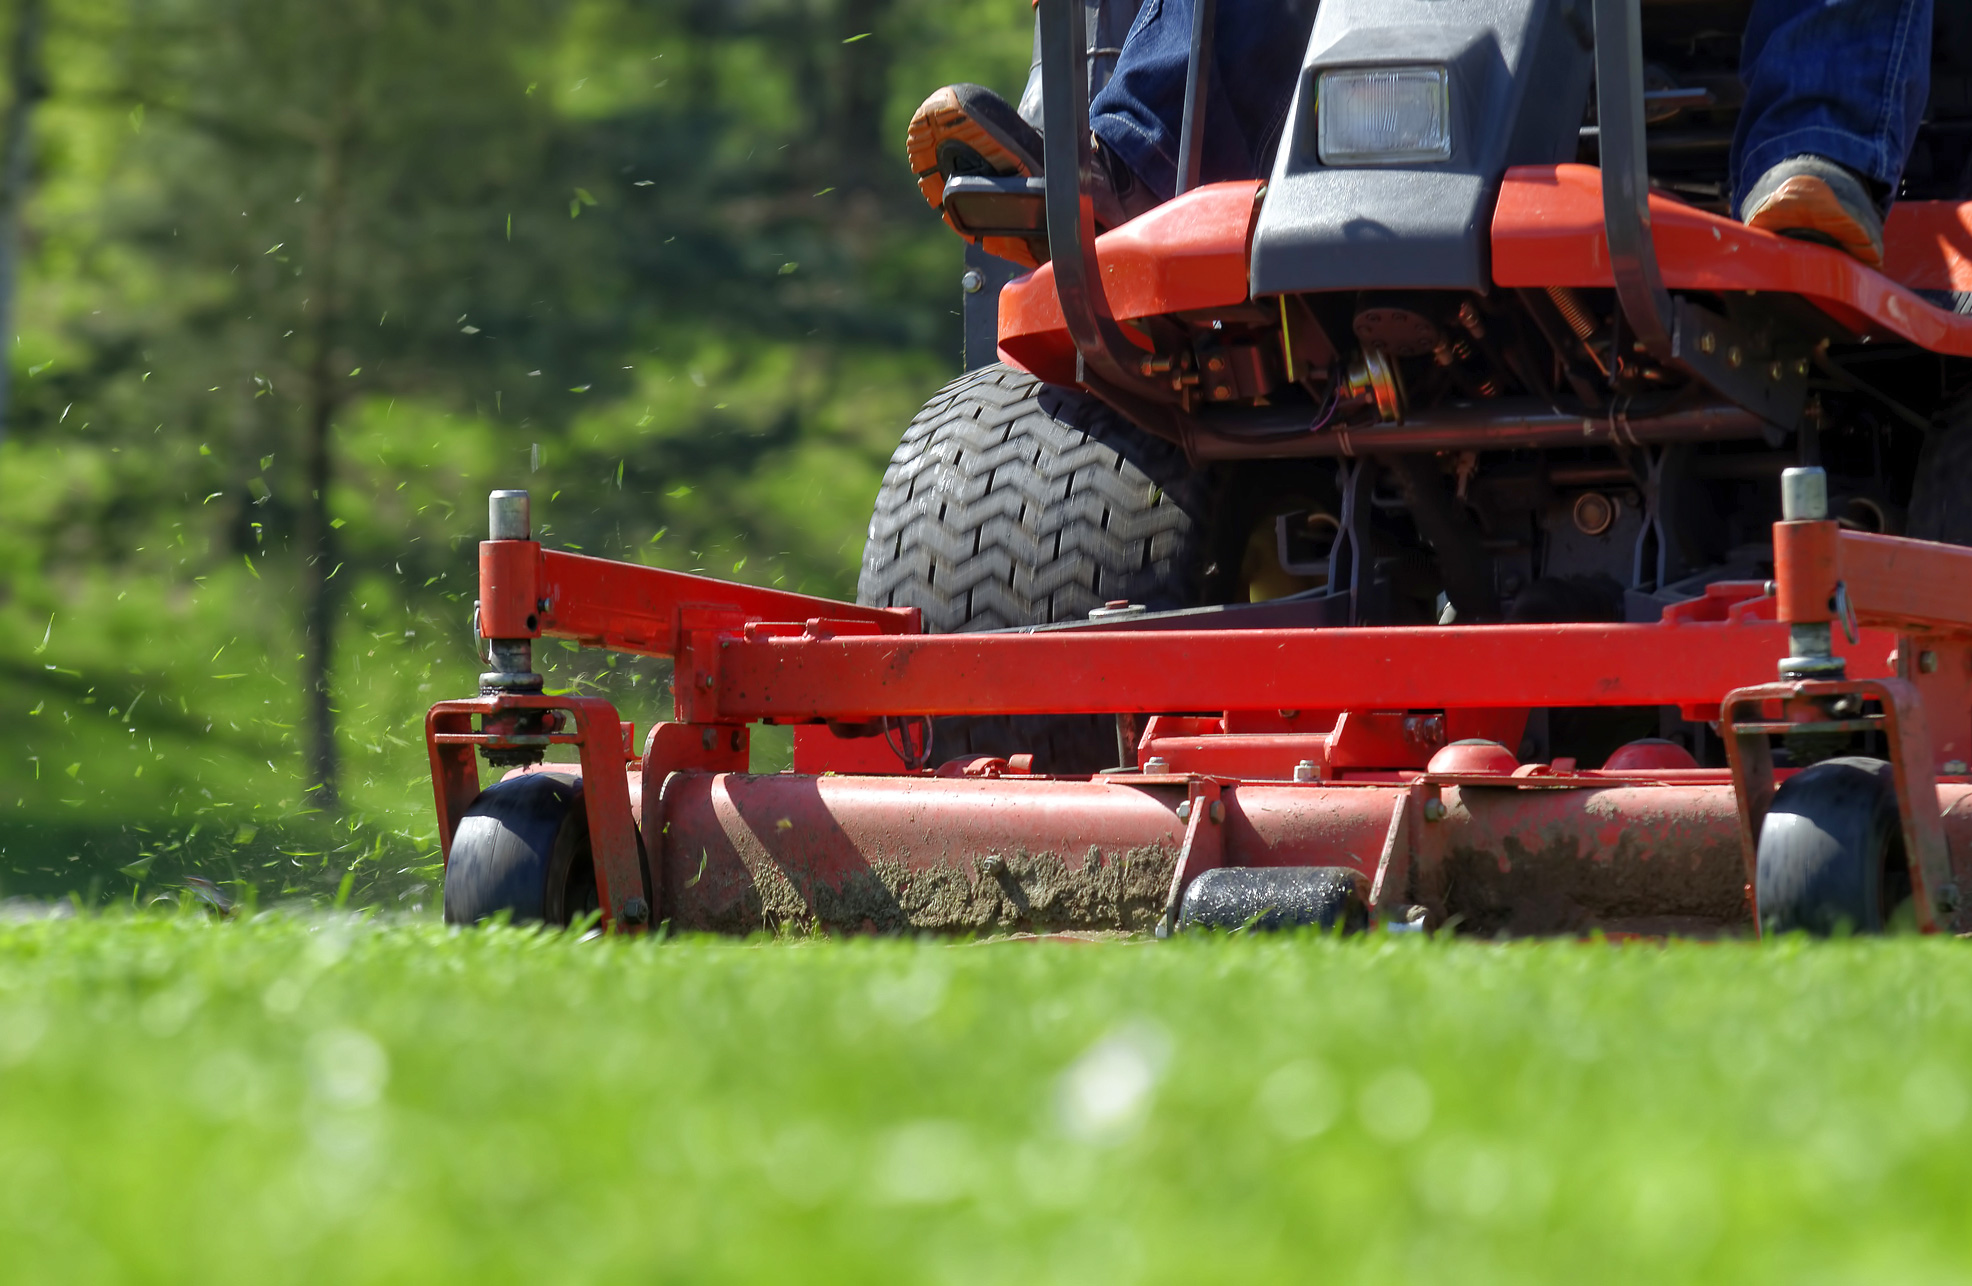 You are currently viewing Safety Behavior and Work Safety Climate among Landscapers and Grounds Keeping Workers in North Carolina: A Pilot Study